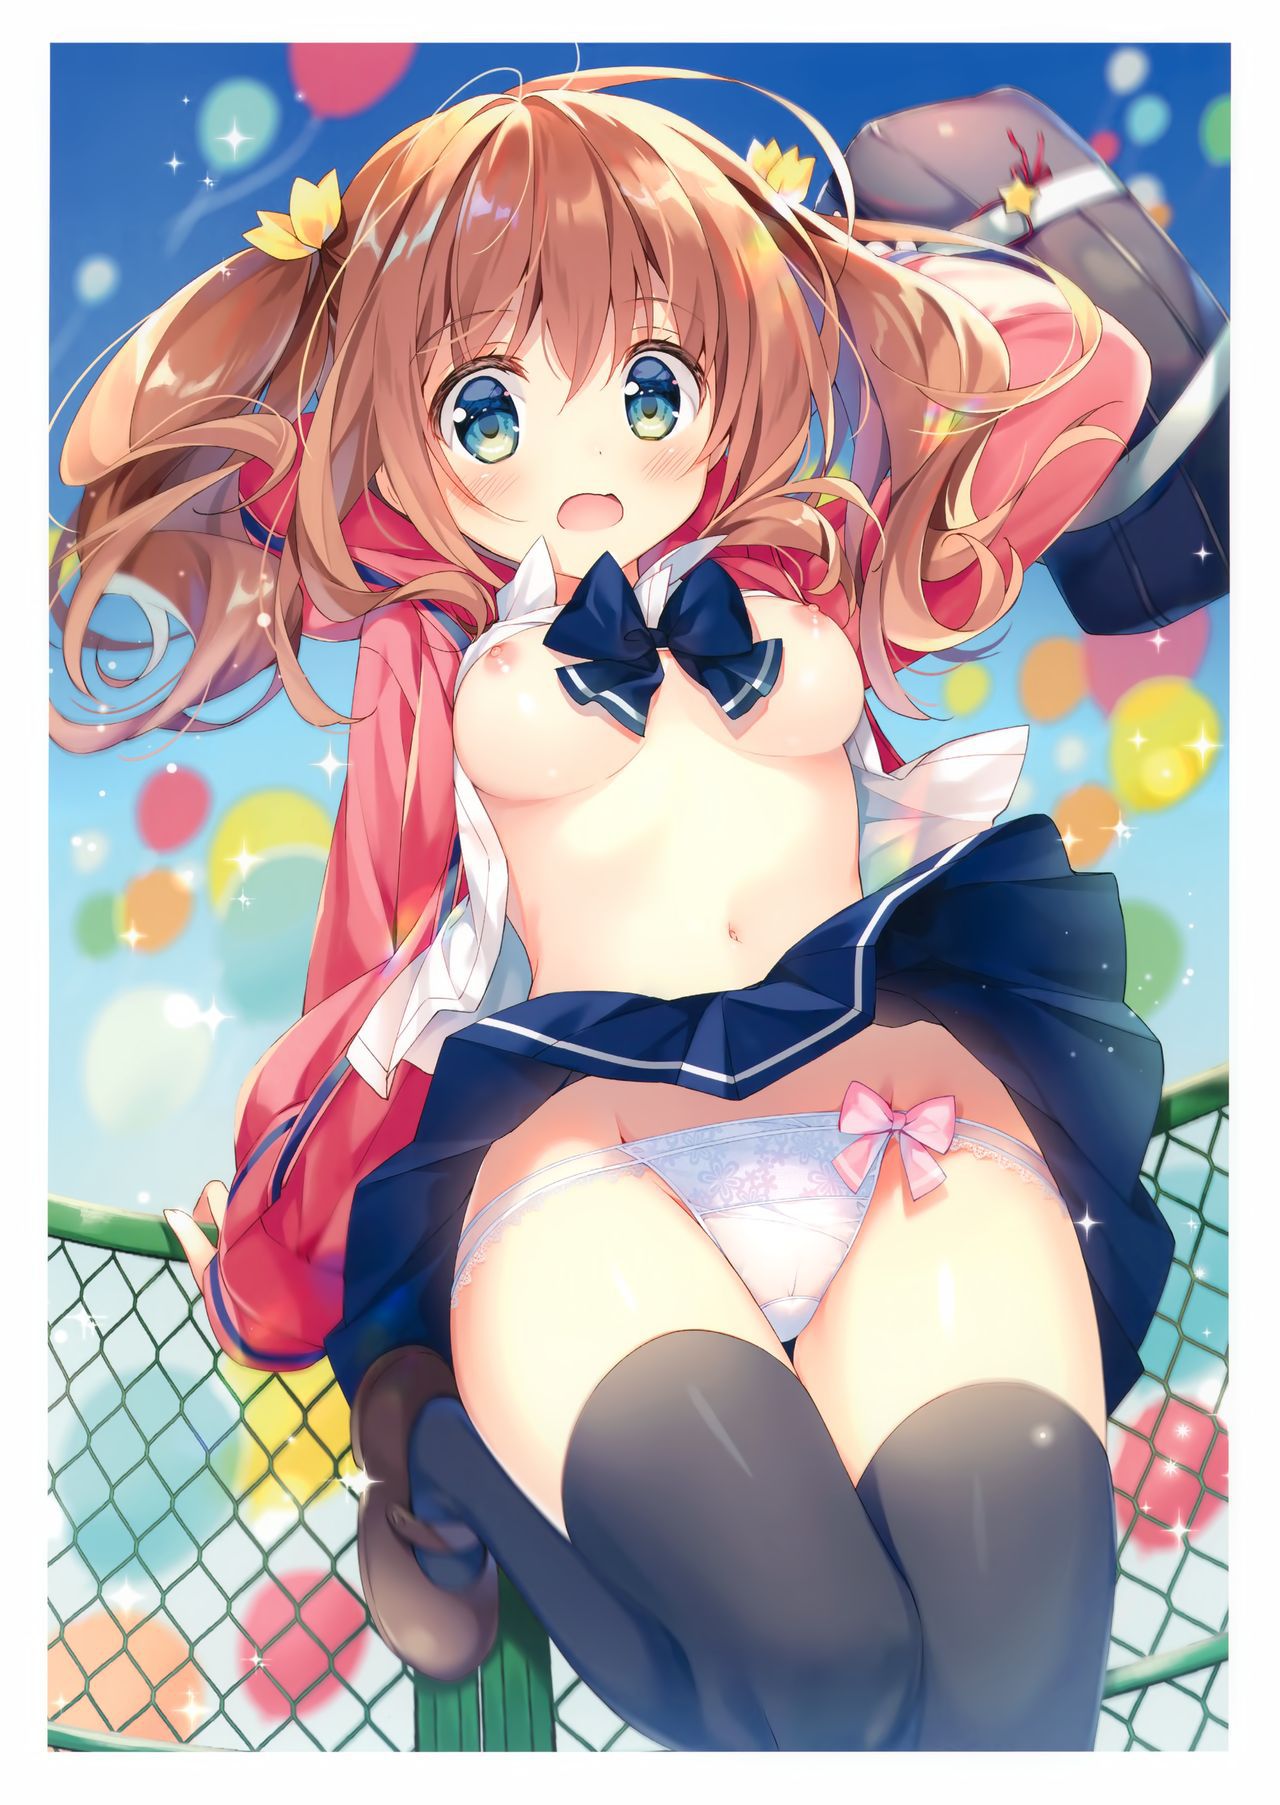 【Excited about Lori pants】 Lori pants secondary erotic image excited by looking at the cute figure of the treasure of the pants of the secondary loli girl 39